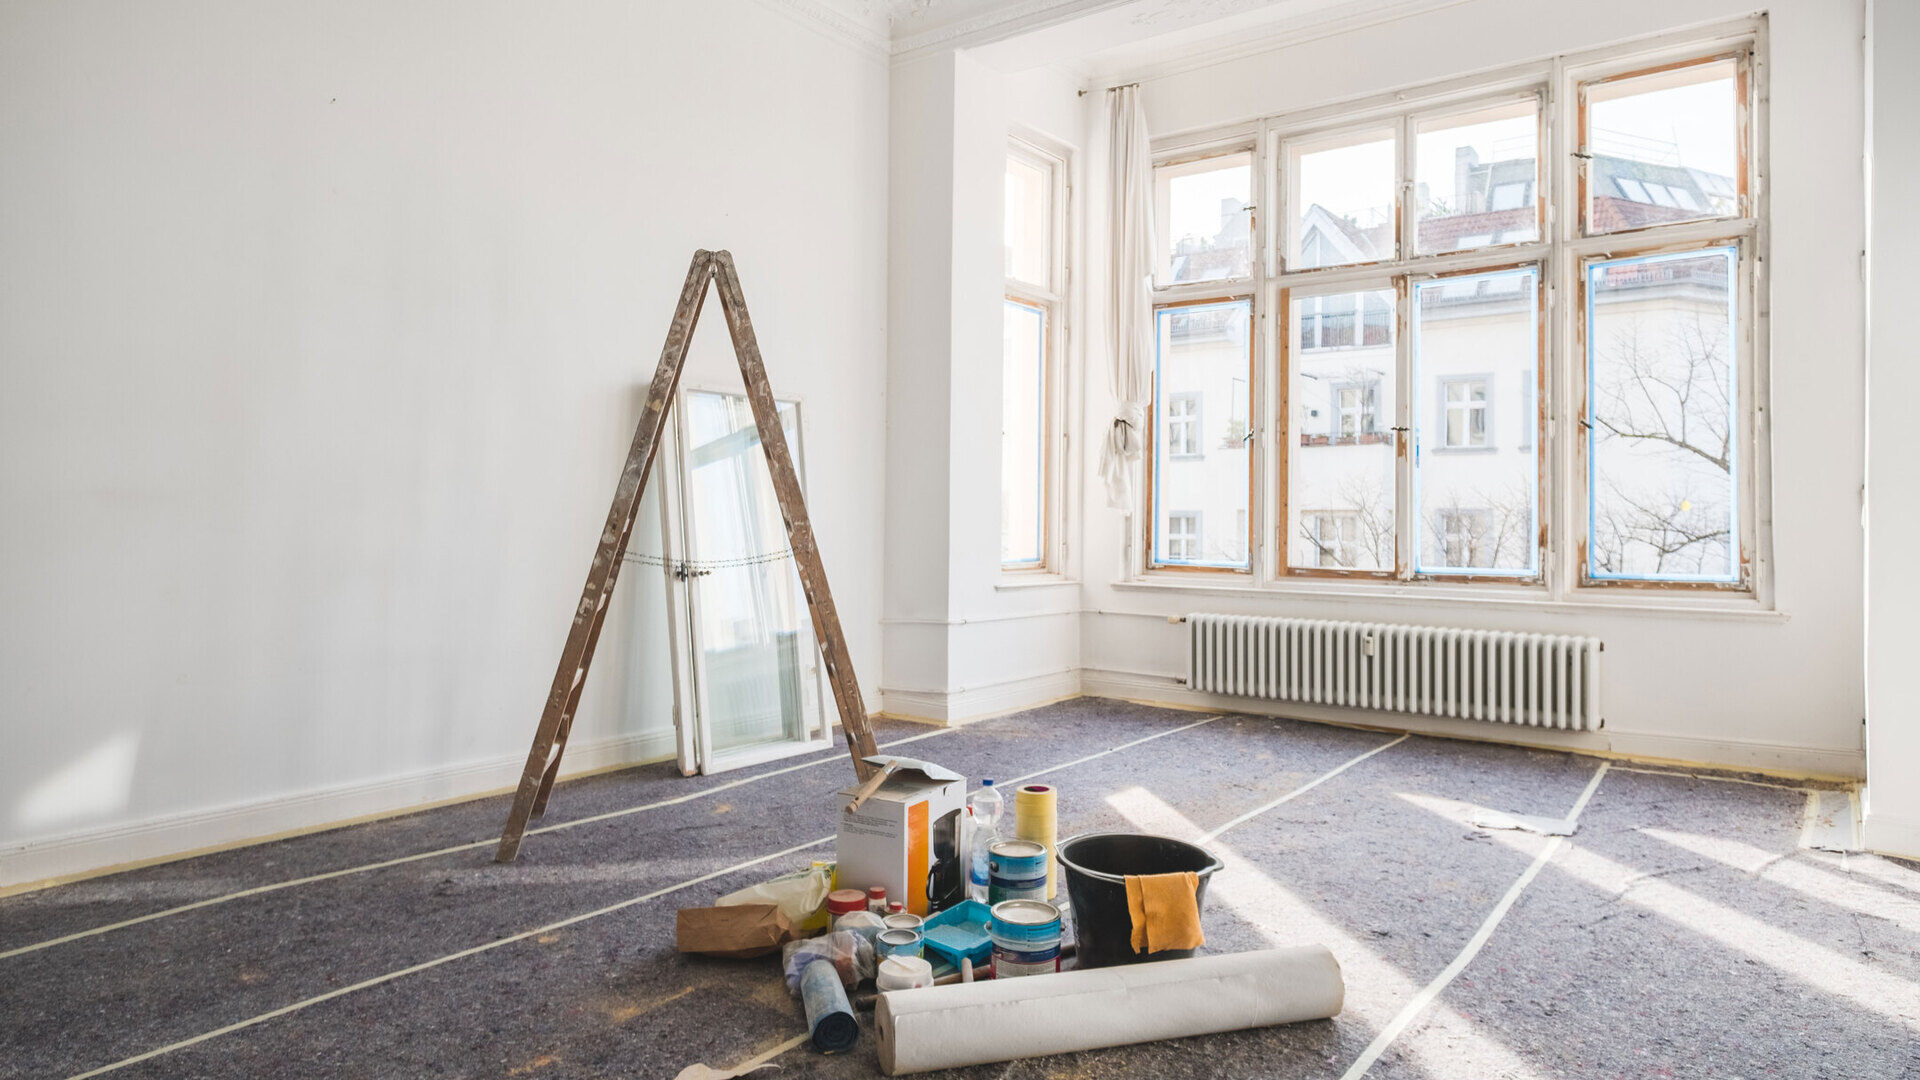 How To Survive A Home Renovation